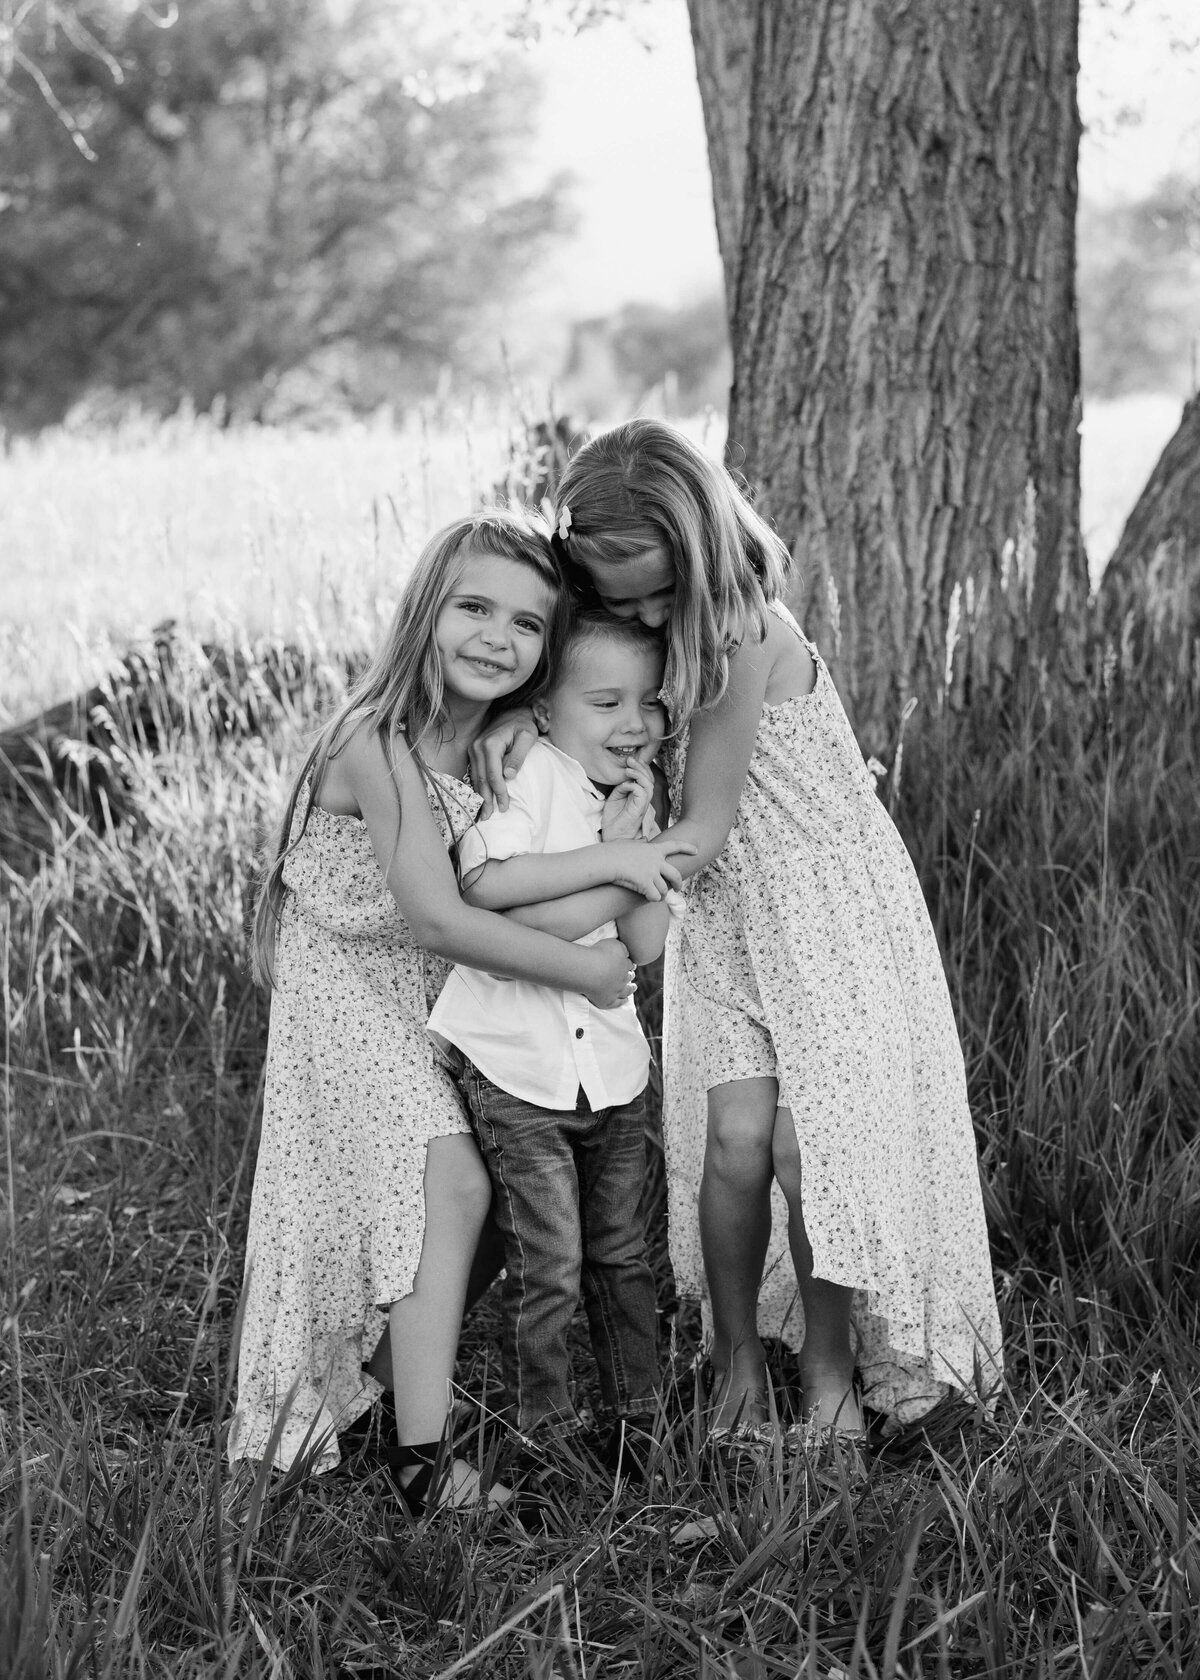 Two young girls hug their toddler brother in a black and white image